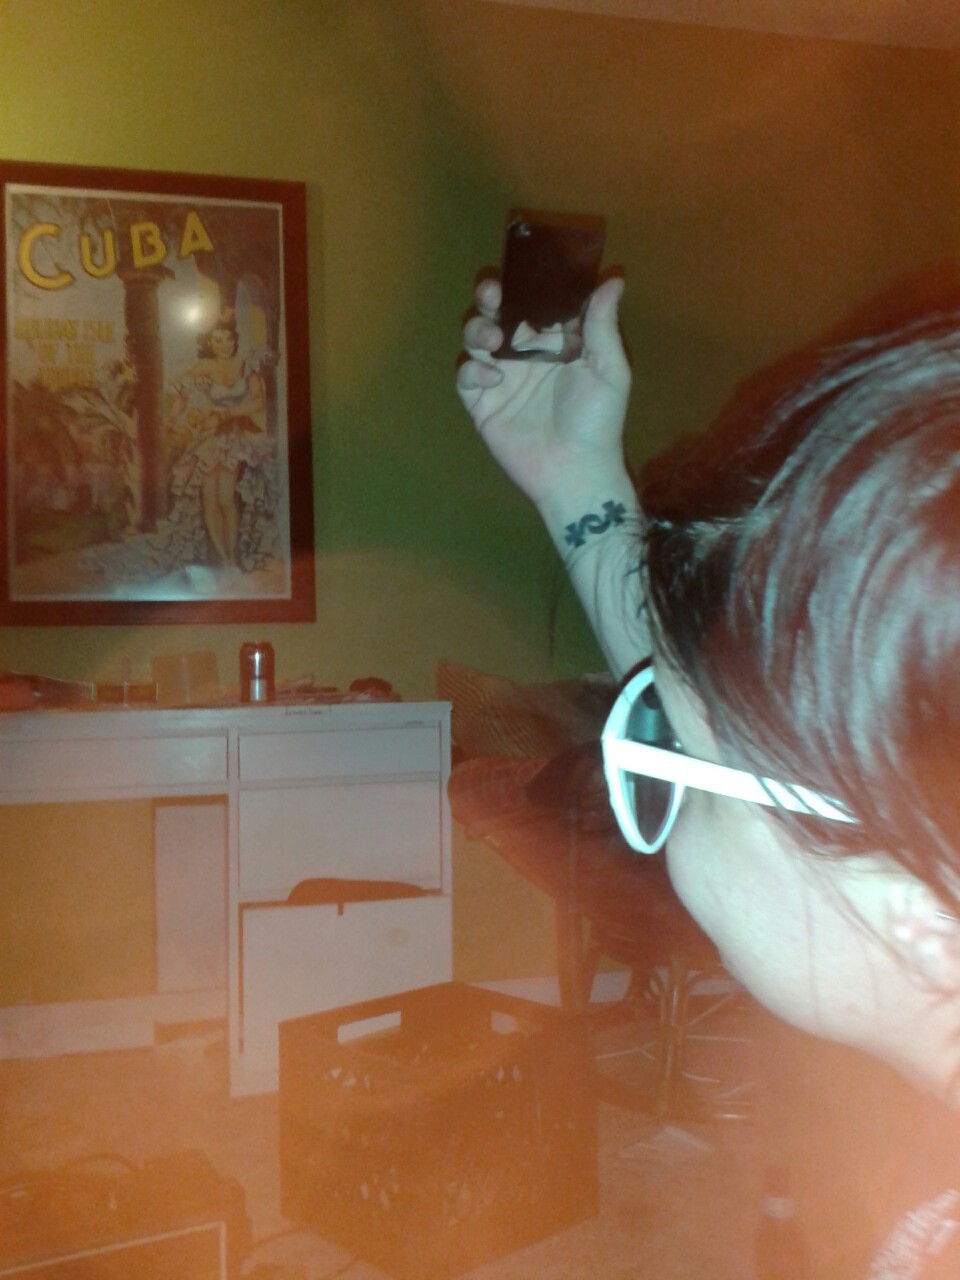 My band mate lofididntdie checking herself out in a bottle opener. We are not classy